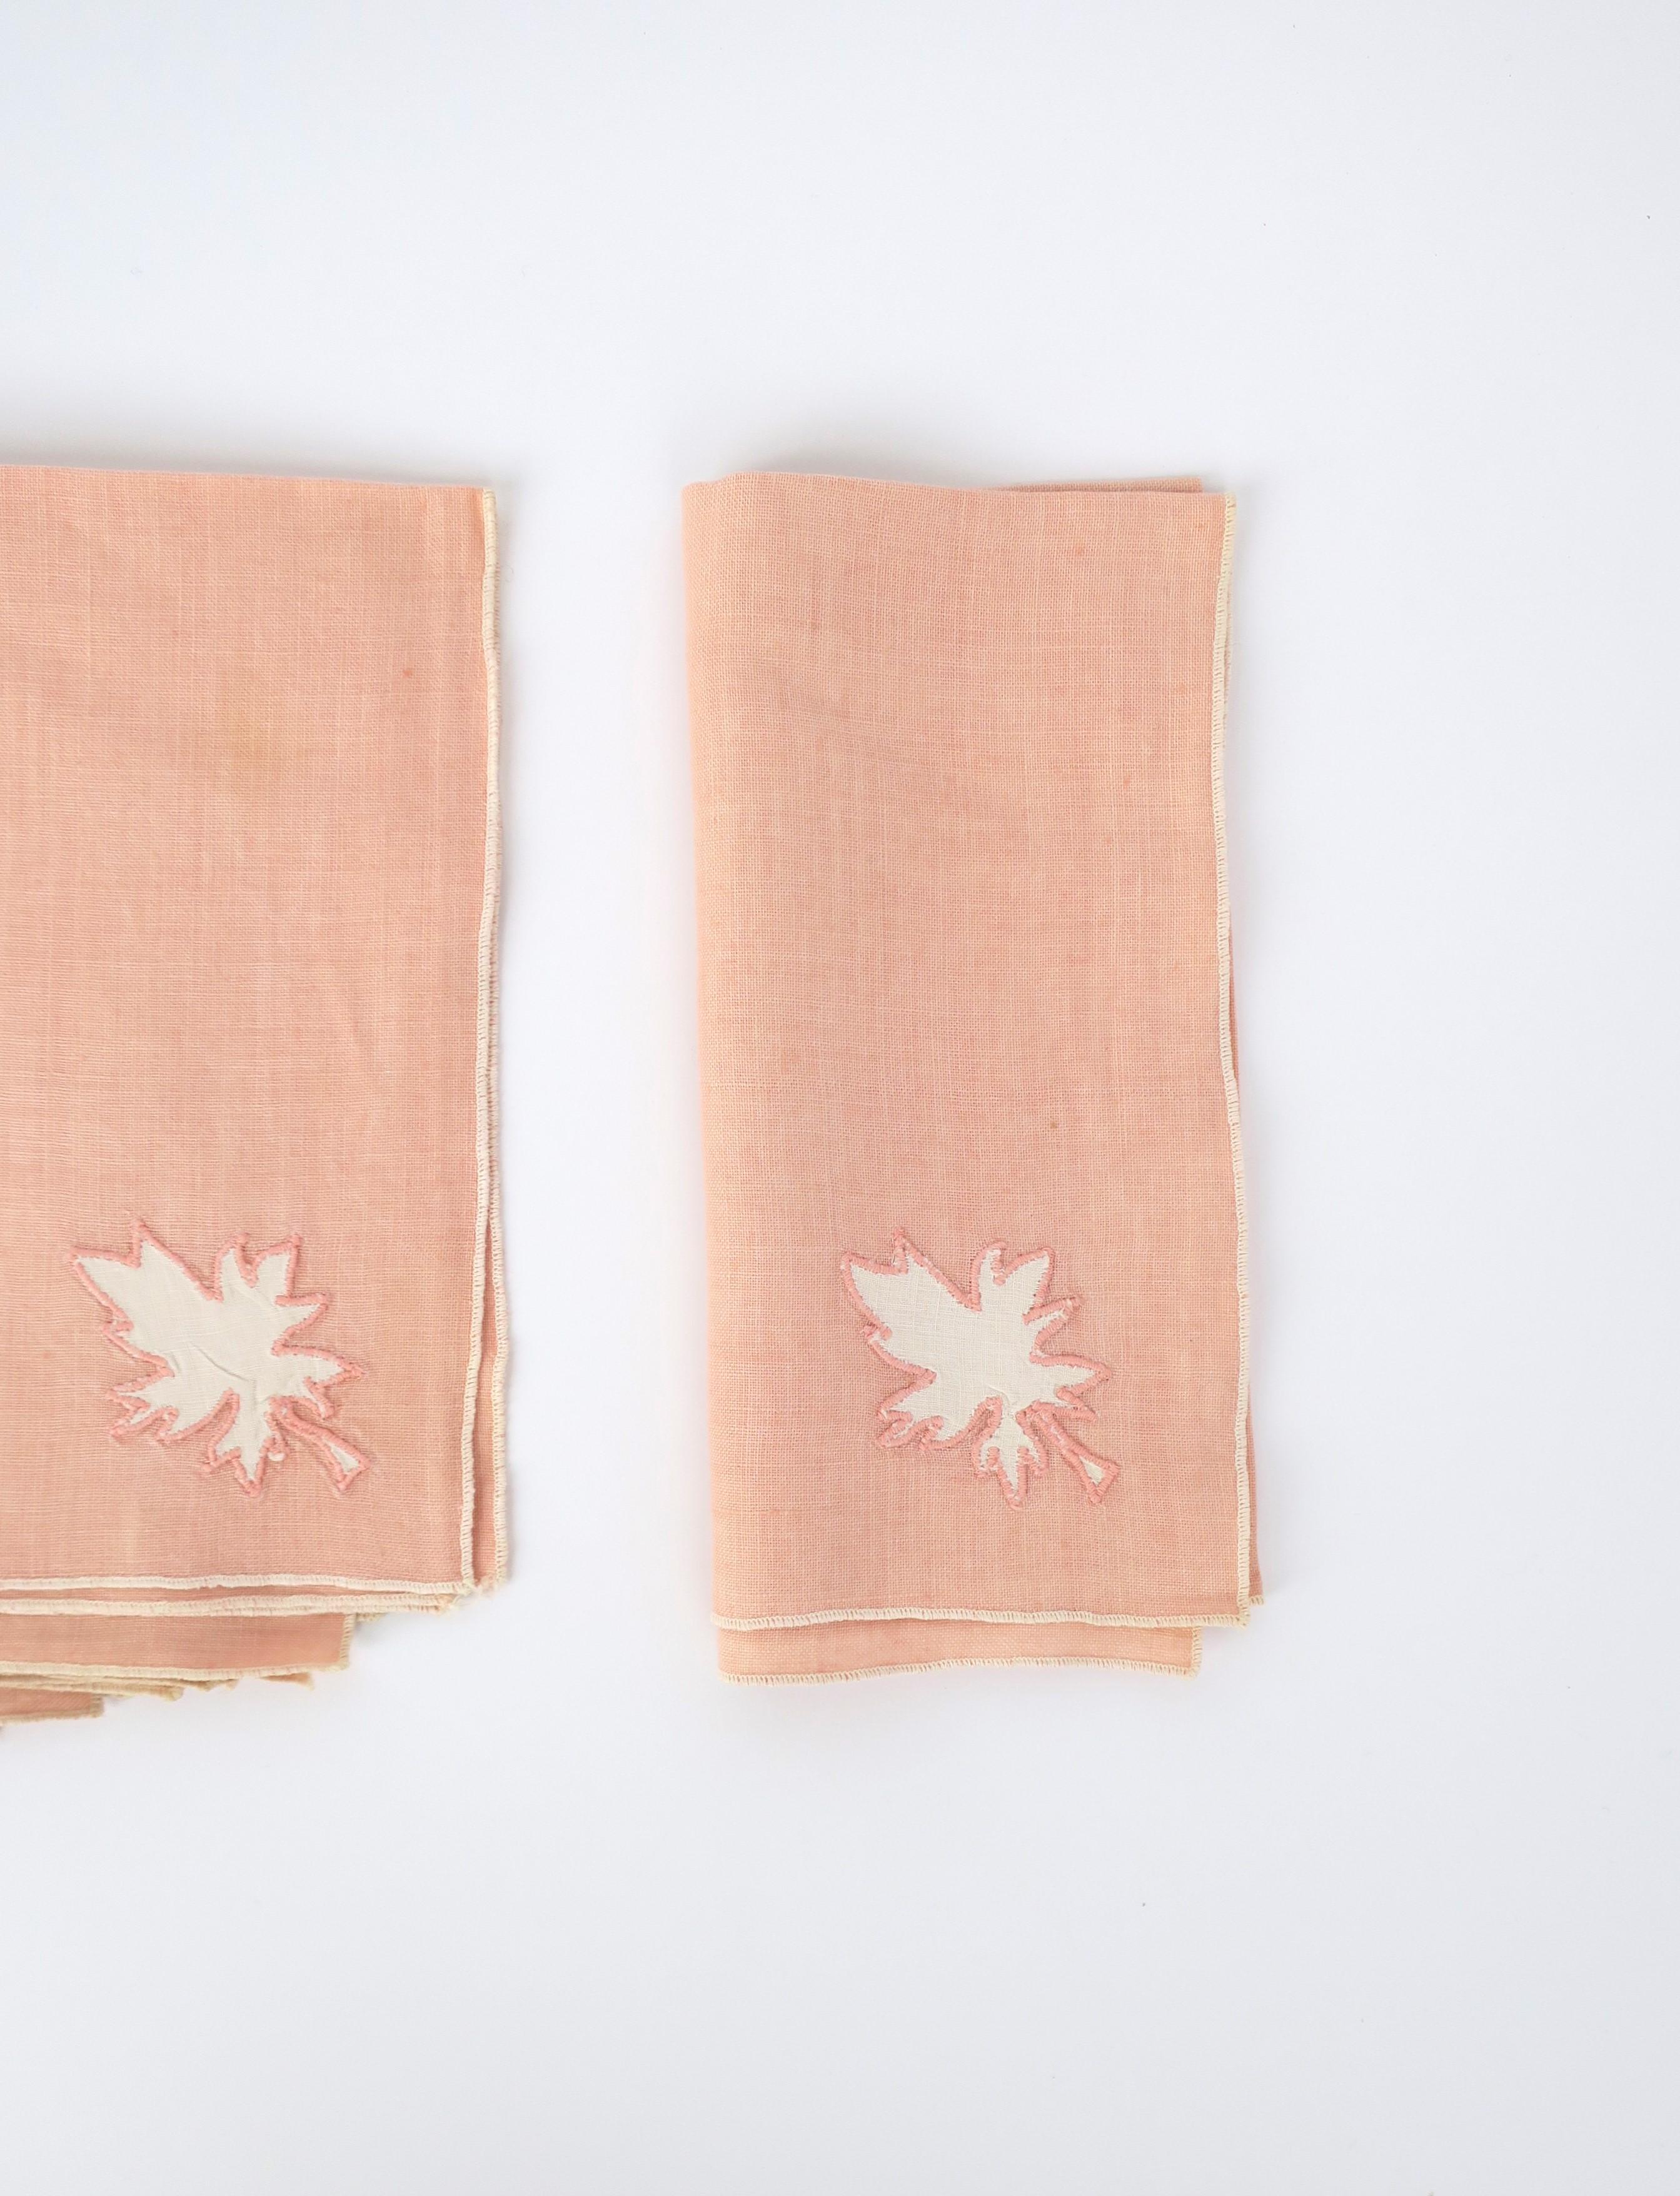 Pink Linen Napkins with Leaf Design, Set of 8 In Good Condition For Sale In New York, NY